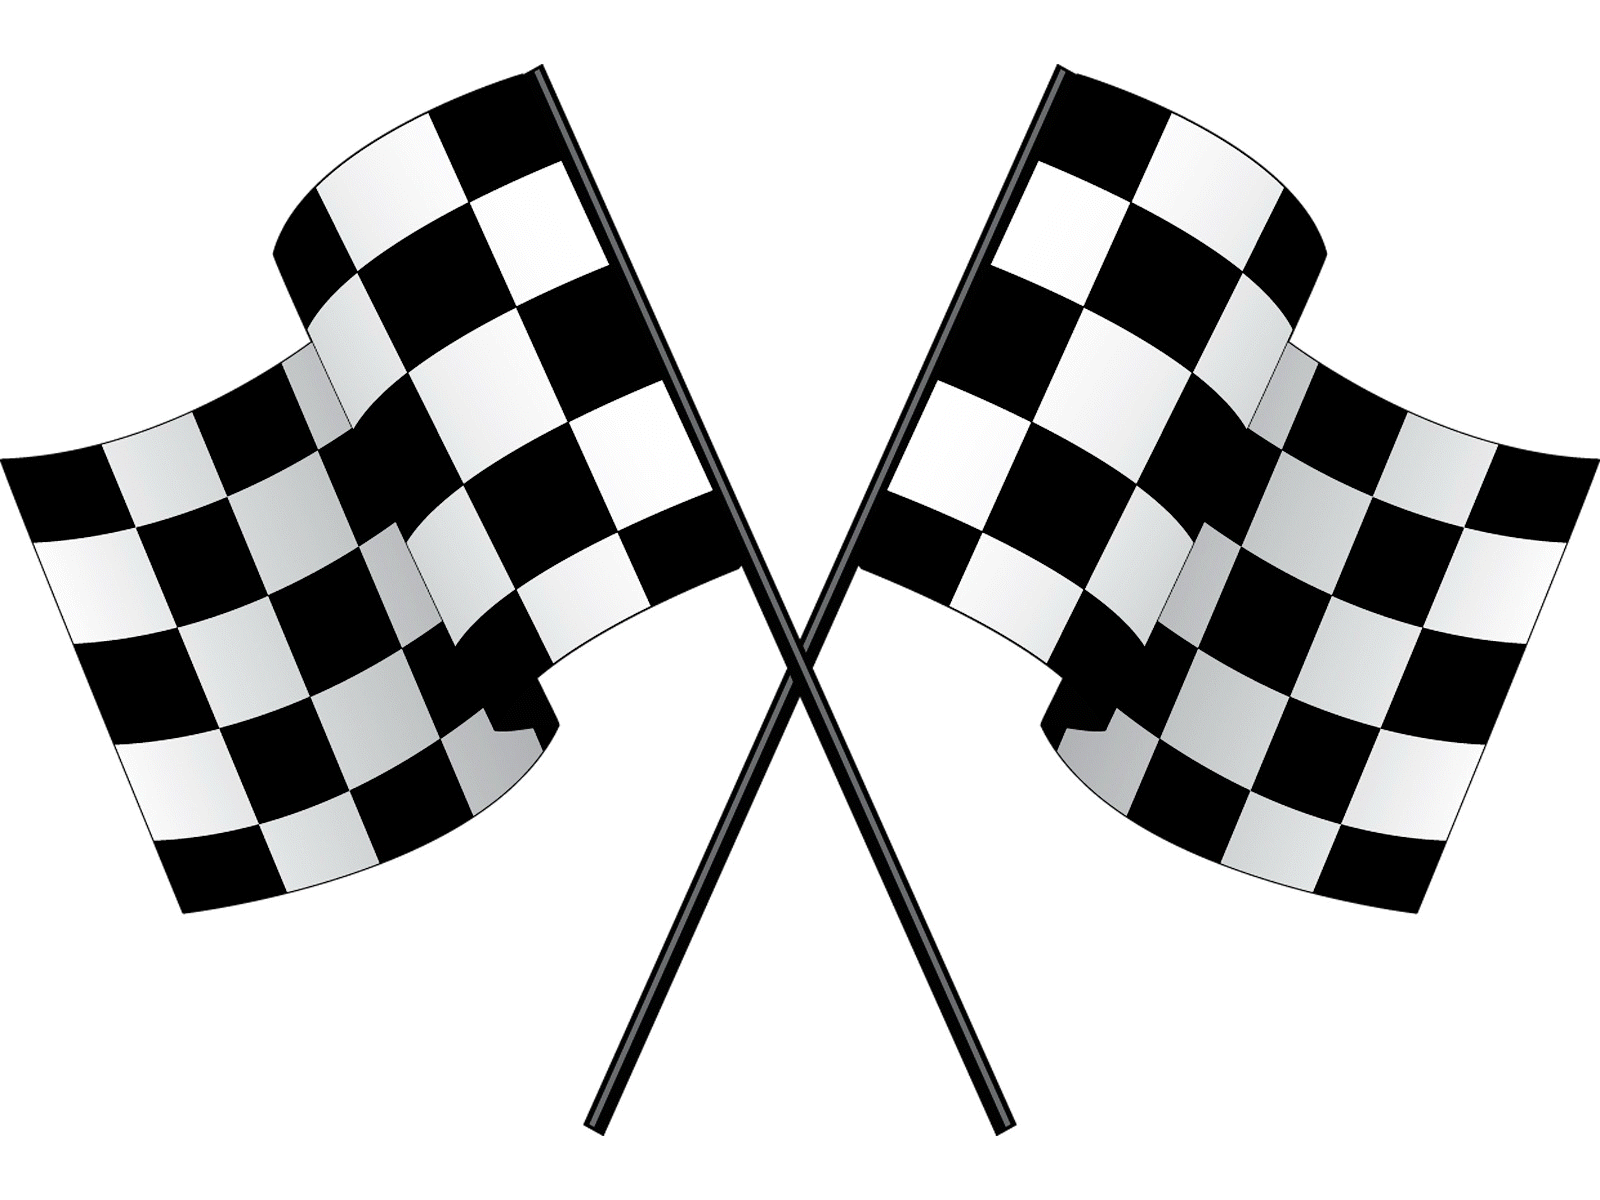 Racing Flag Vector Png - ClipArt Best